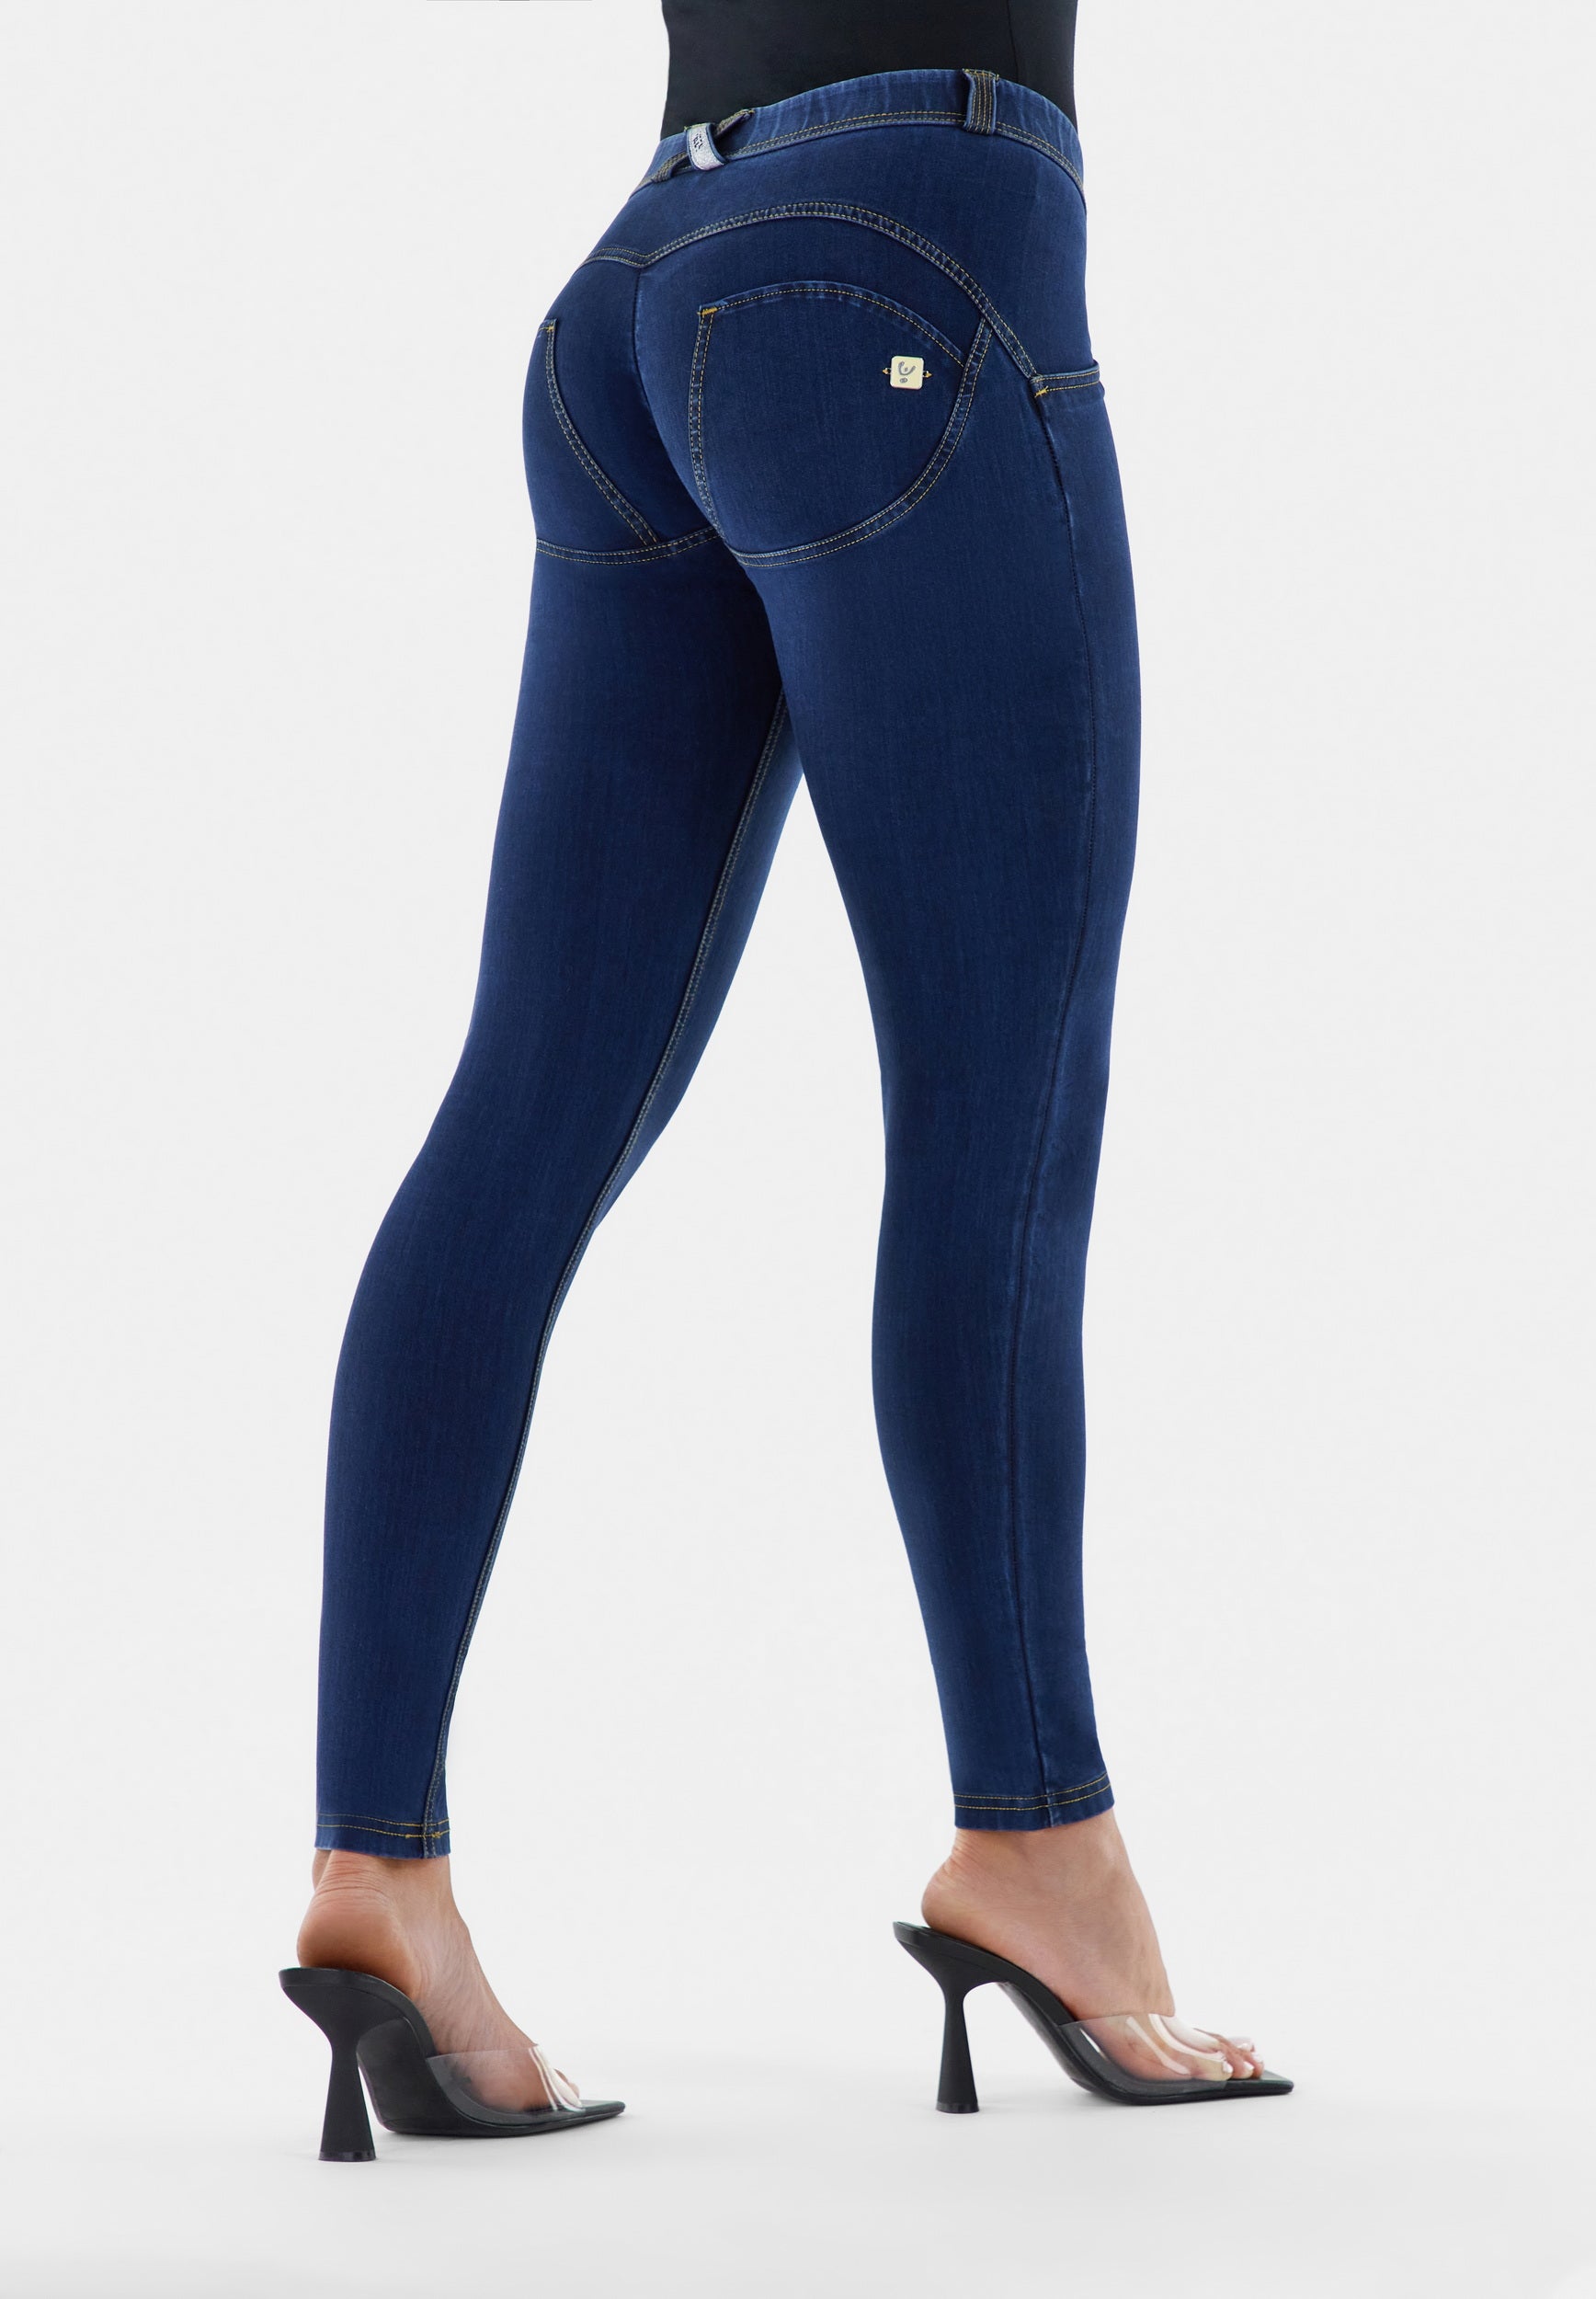 Jeans Ladies Skinny Jeans Trousers Push Up with Print  eBay